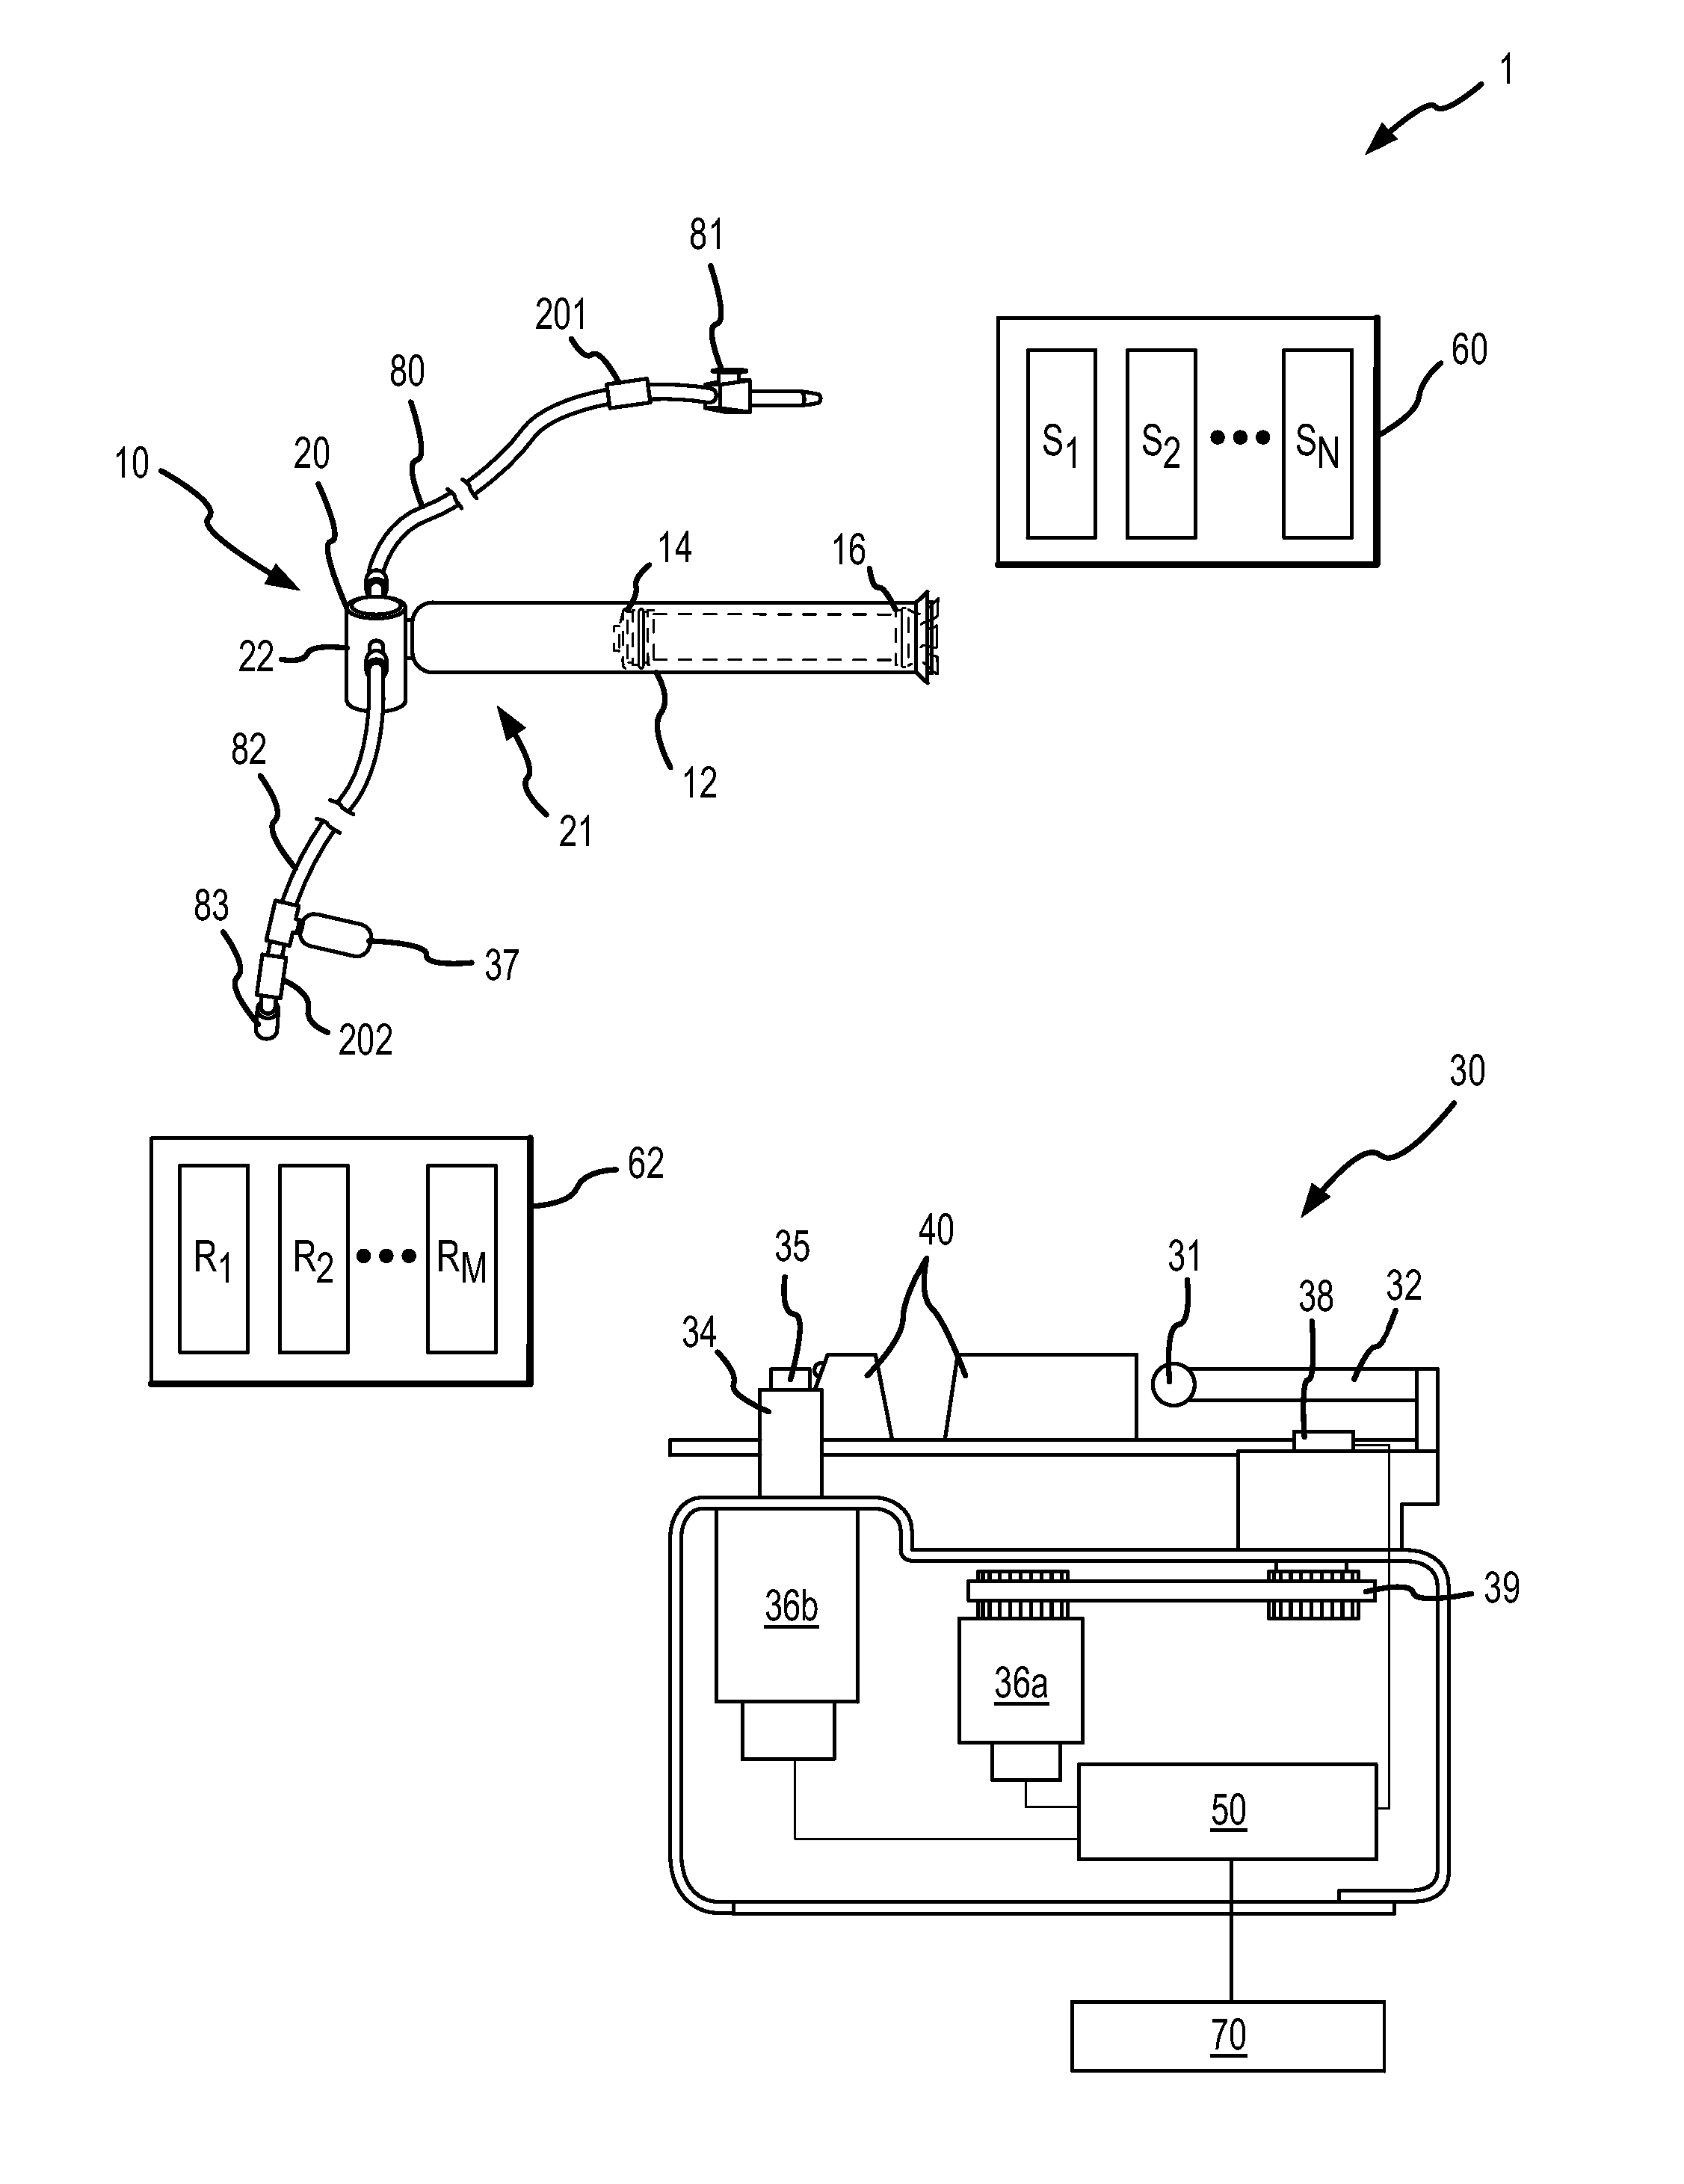 Automated medical liquid filling system and method